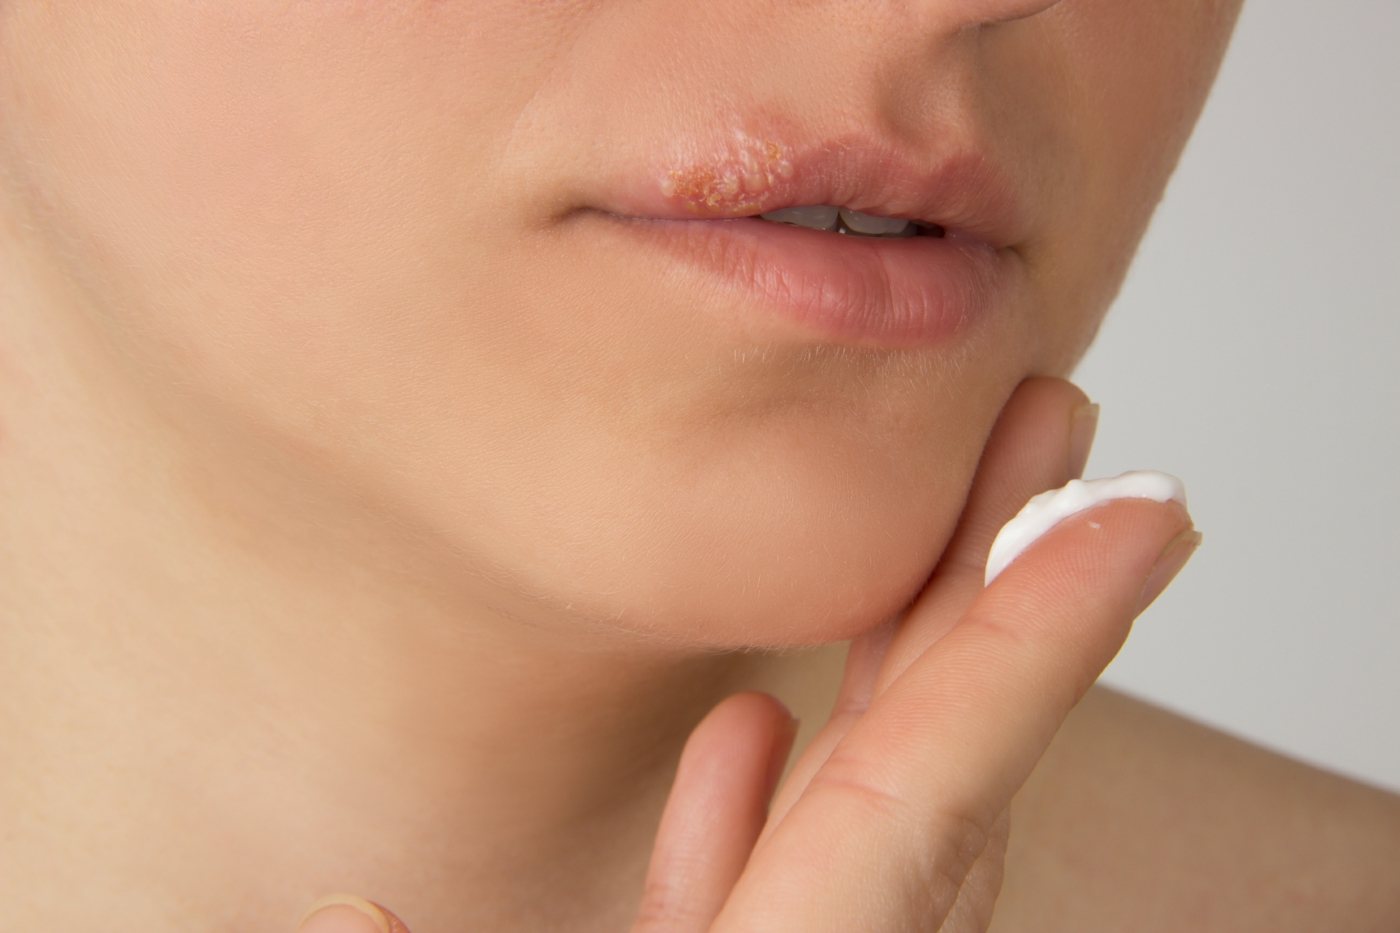 Creams and ointments from the pharmacy in battle against lip herpes reduce the duration of the disease